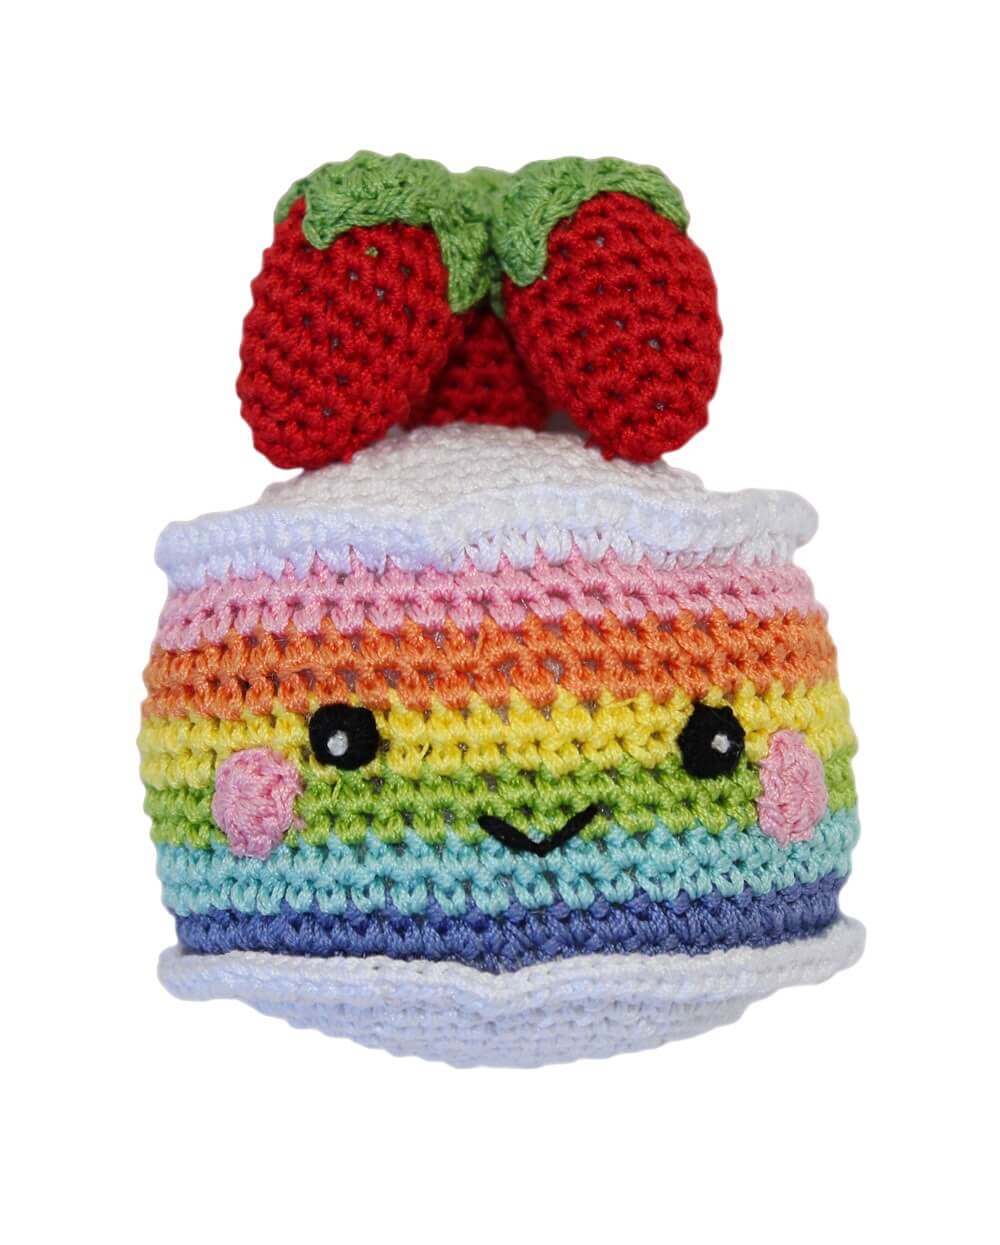 Knit Knacks &quot;Rainbow Cake&quot; handmade organic cotton dog toy. Smiling anthropomorphic cake with rainbow layers and strawberries on its head.